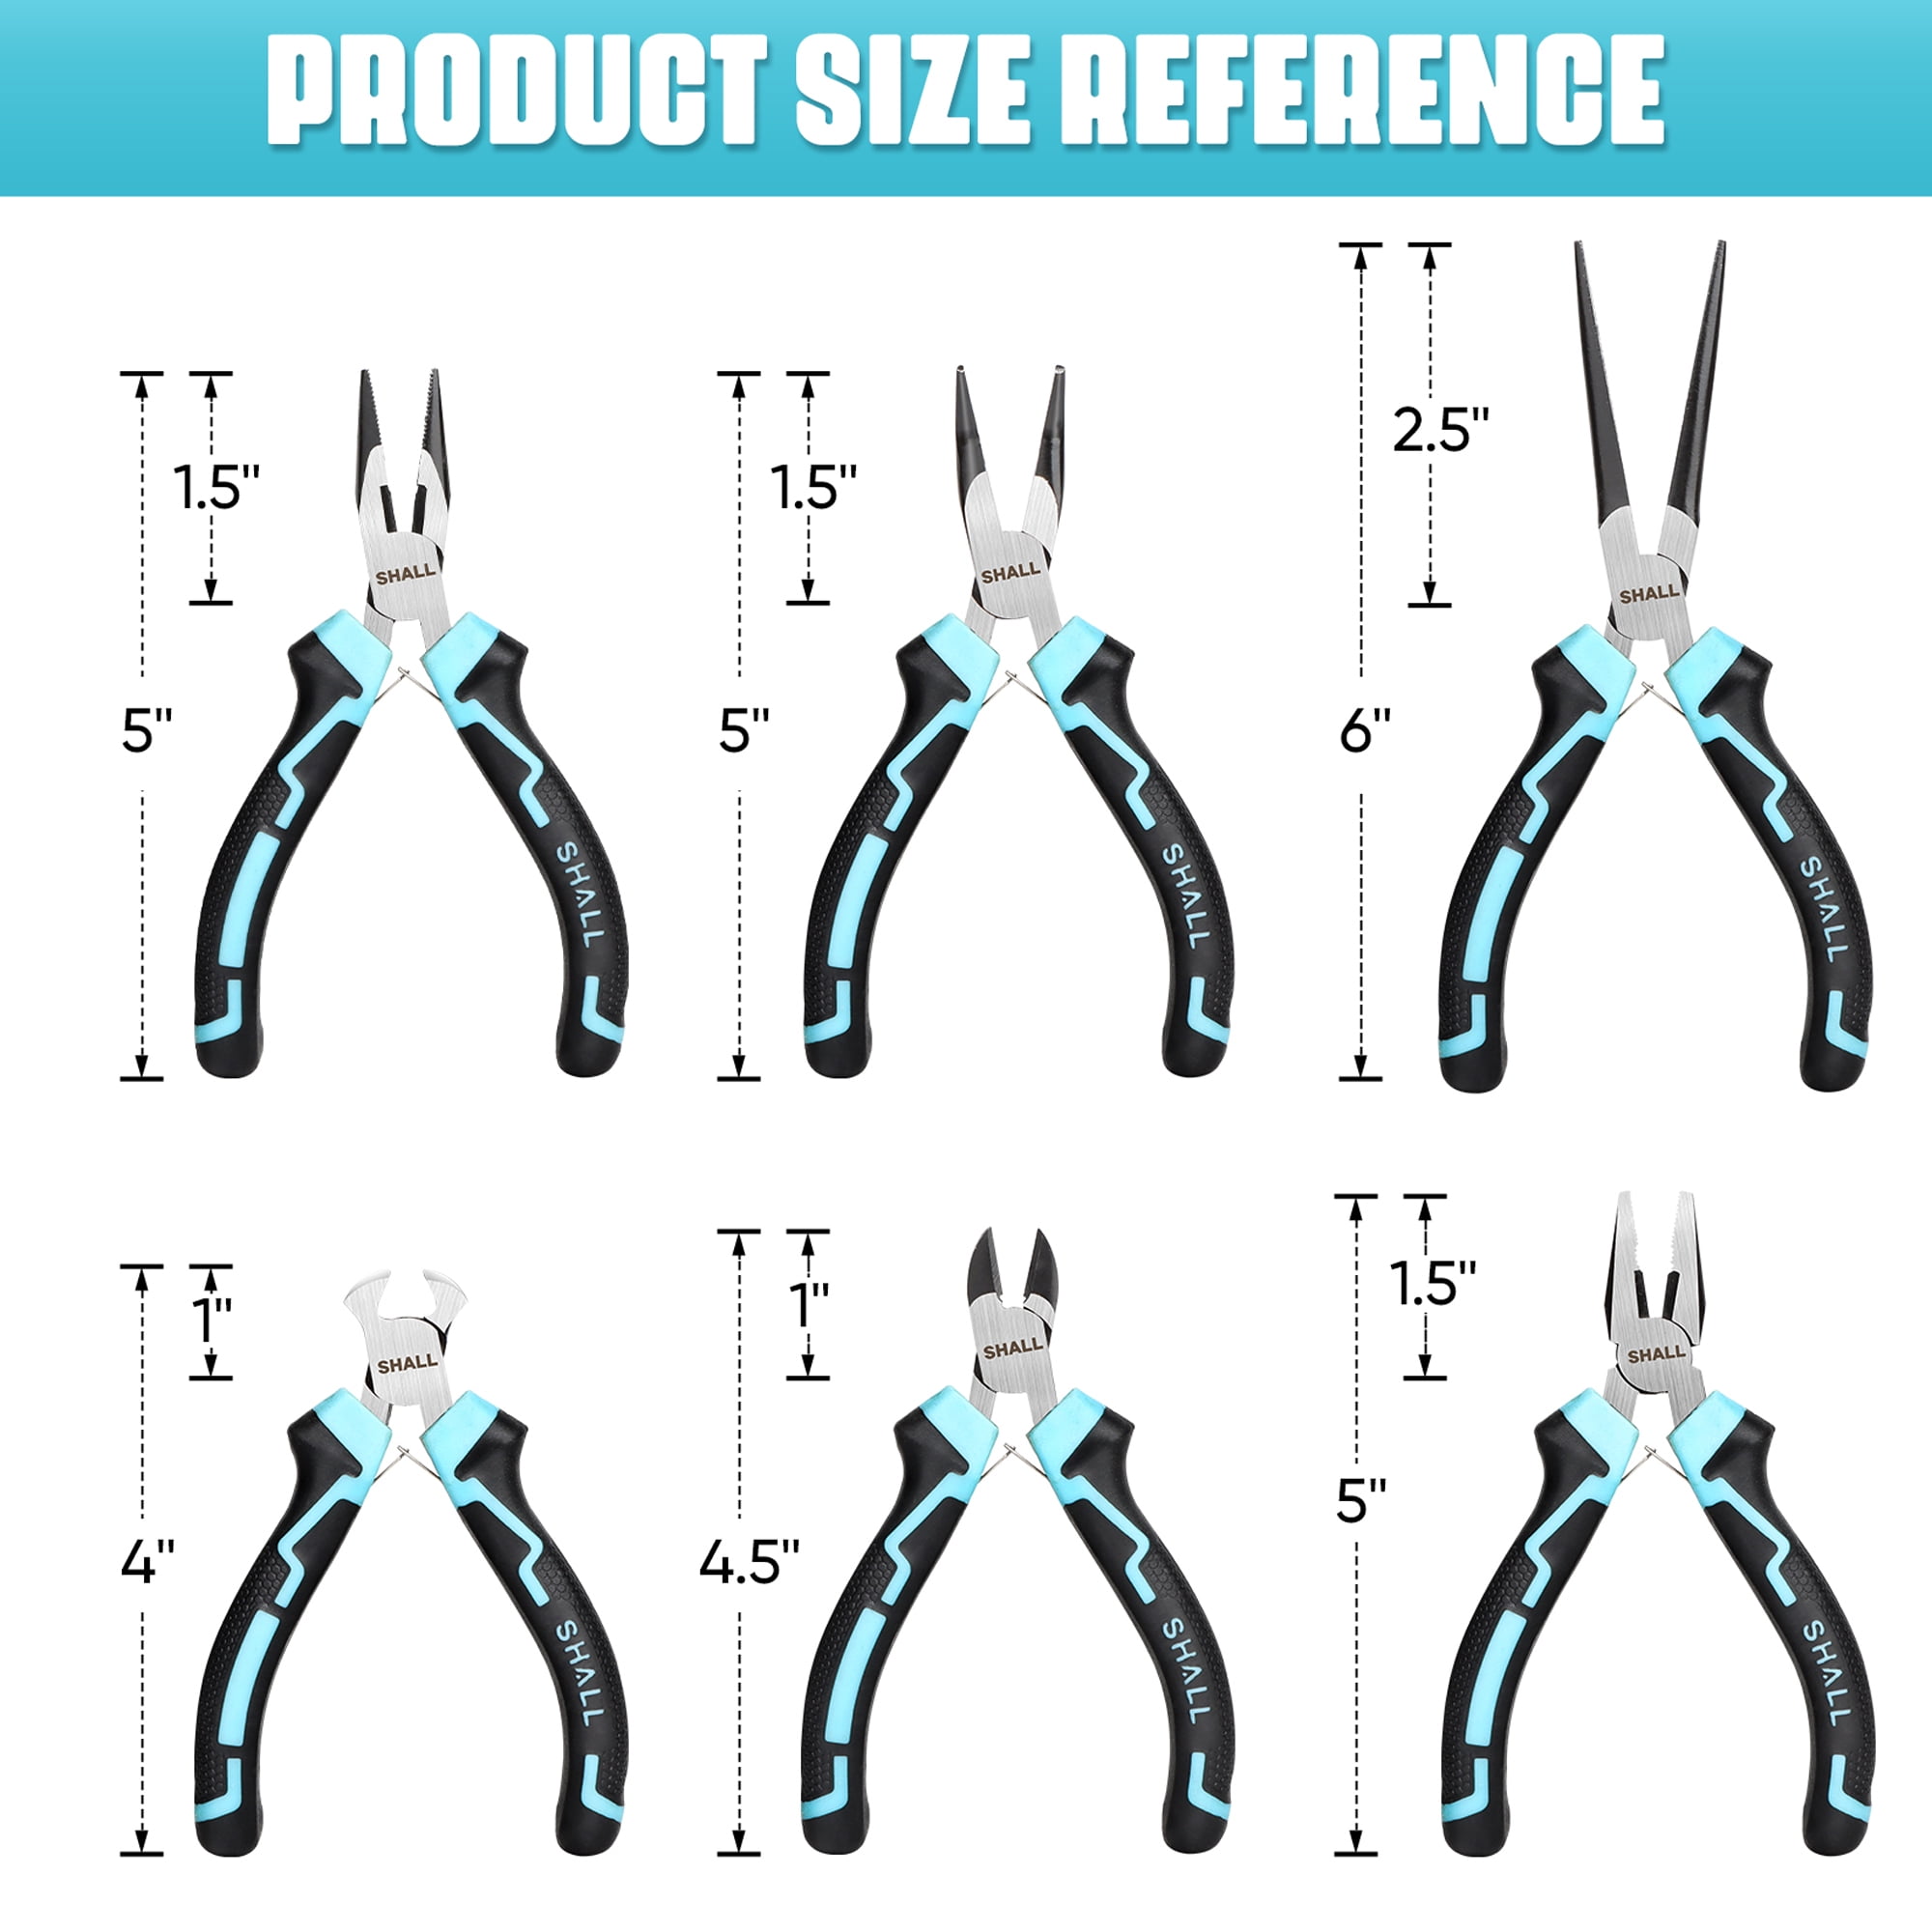 SHALL Mini Pliers Set, 6-Piece Small Pliers Tool Set Includes Needle Nose,  Long Nose, Bent Nose, Diagonal, End Cutting and Linesman for Making Crafts,  Electronic Repairing & Jewelry with Pouch 